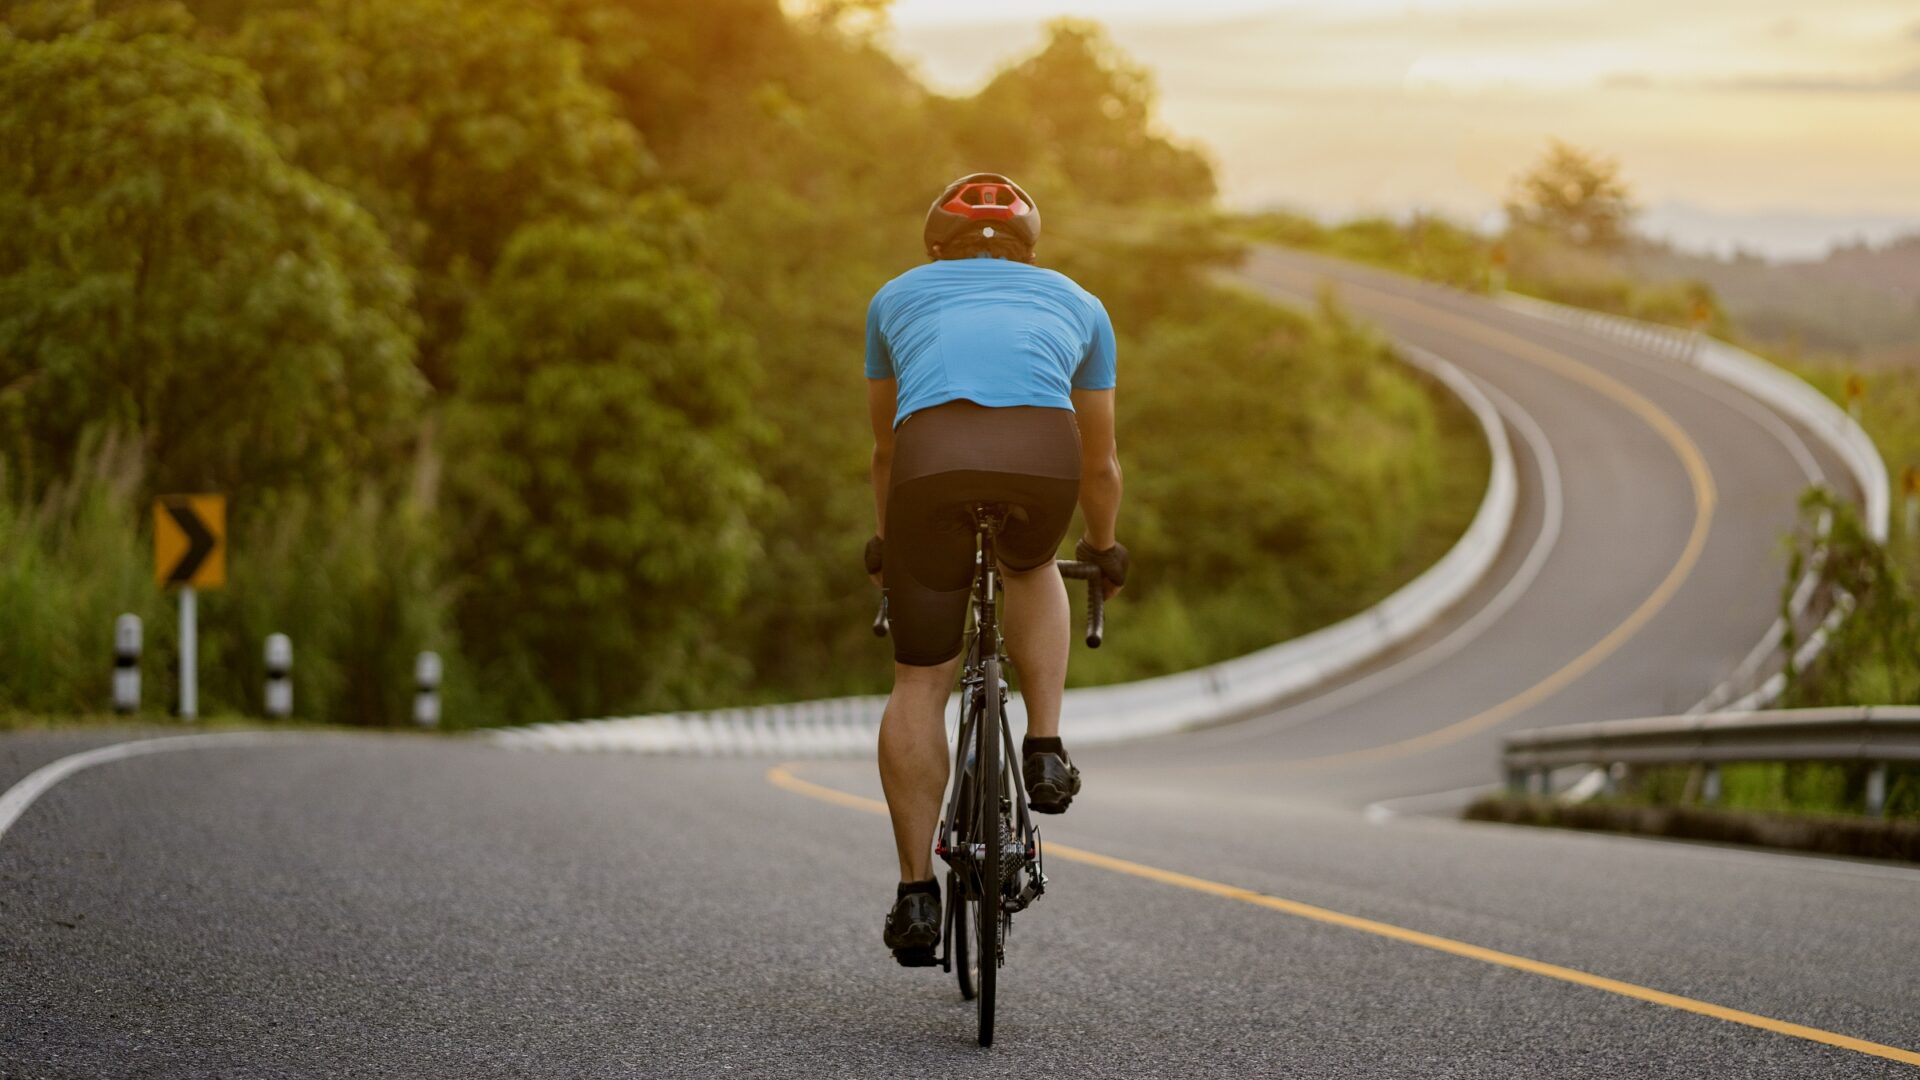 Rear shot of a cyclist riding a rolling road at sunset